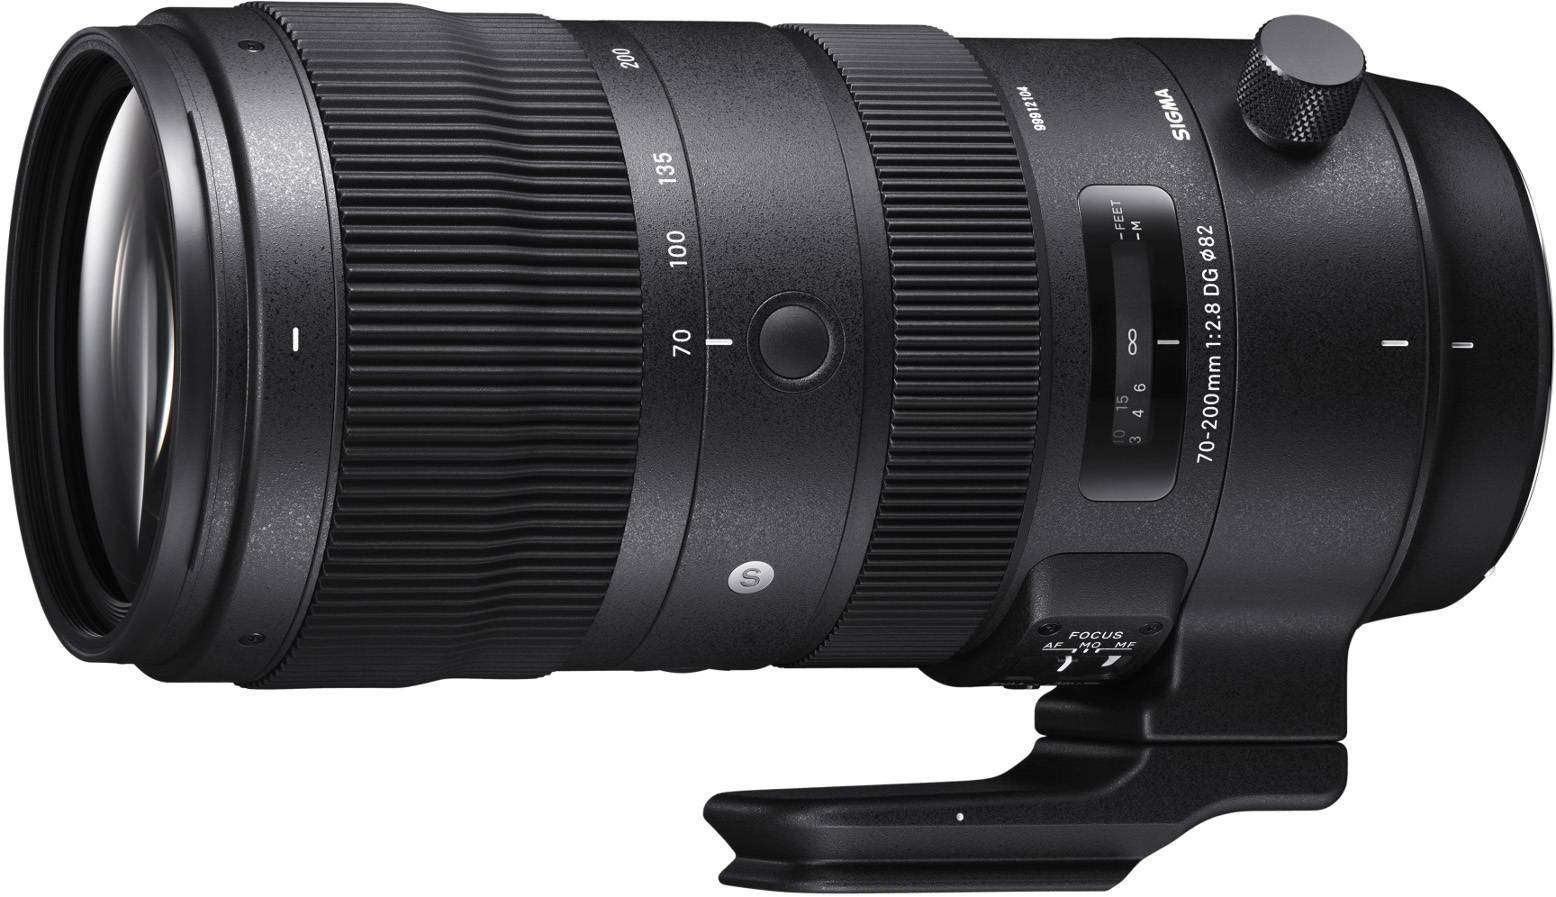 Sigma 70-200mm f/2.8 DG OS HSM Sport Lens for Canon